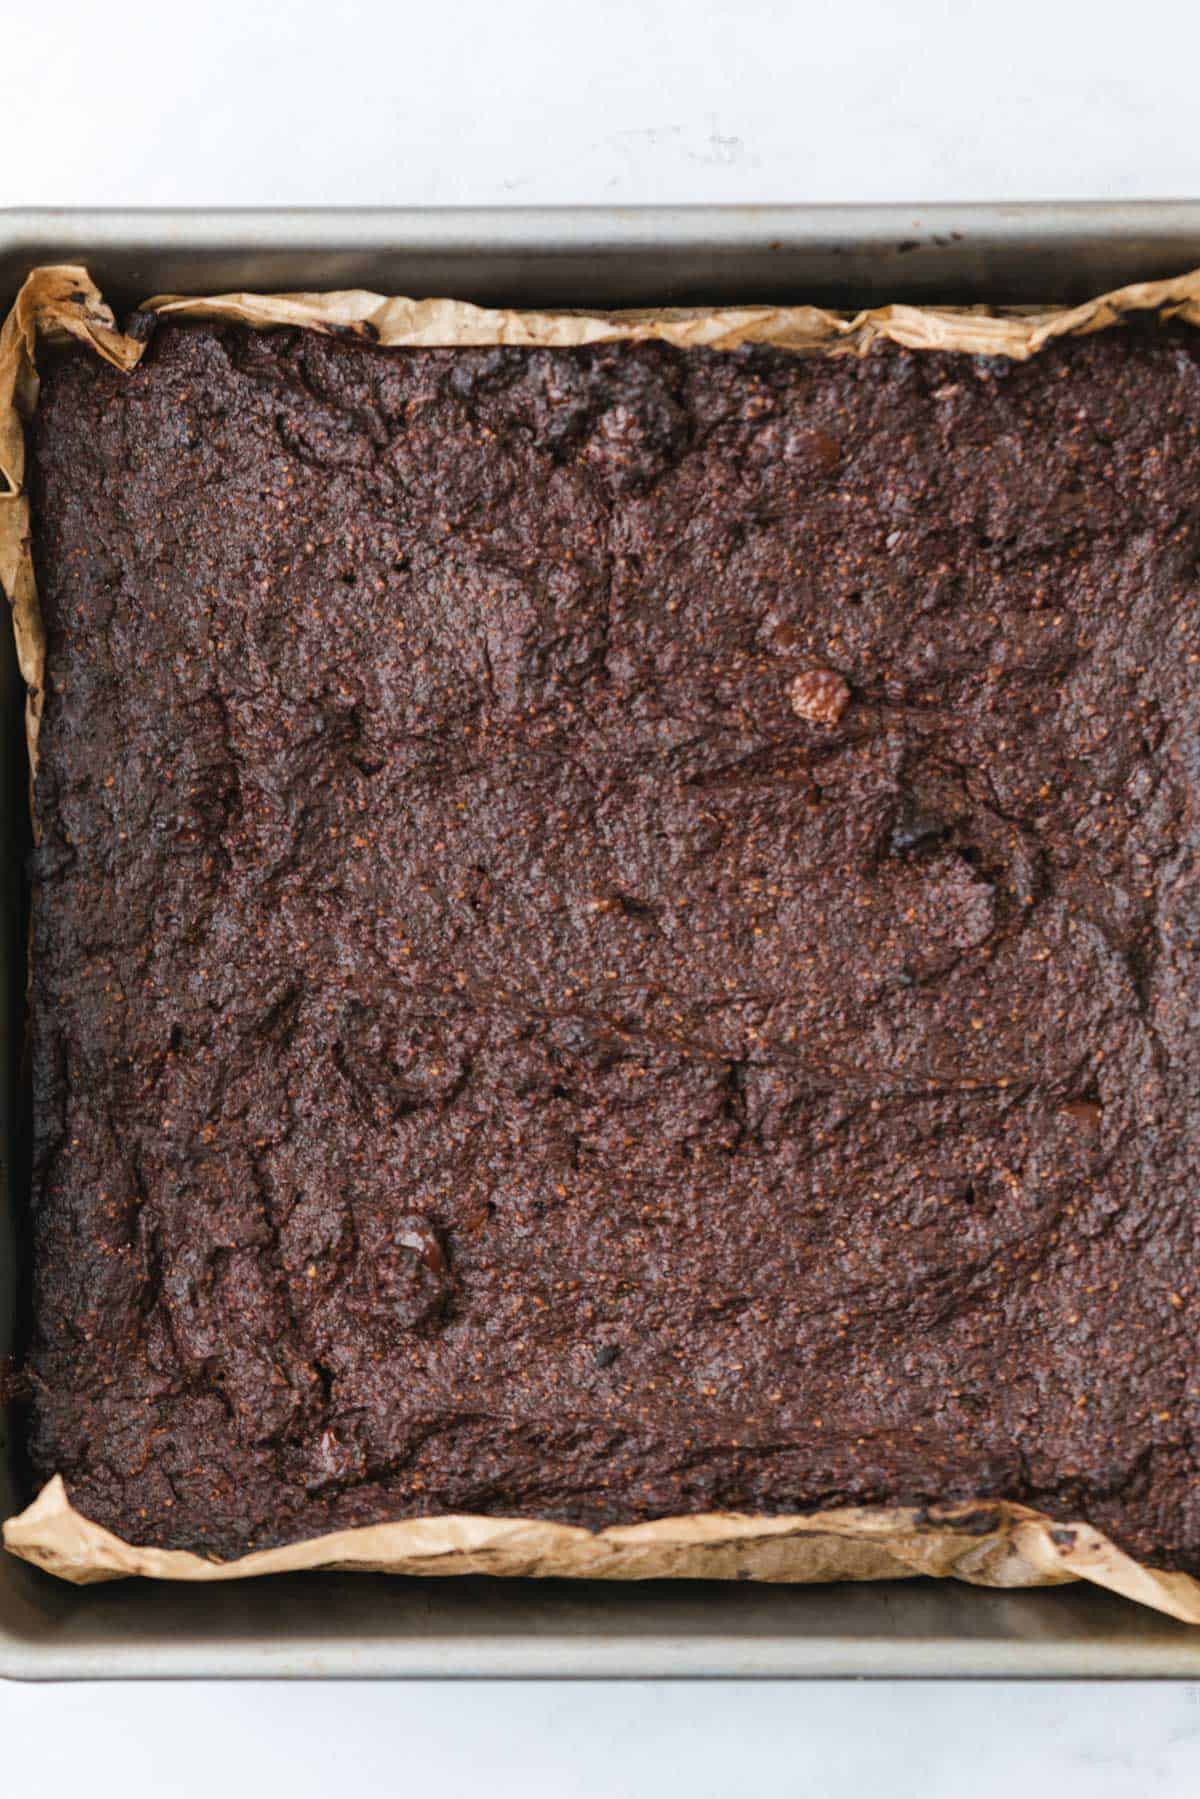 brownies baked in a baking sheet